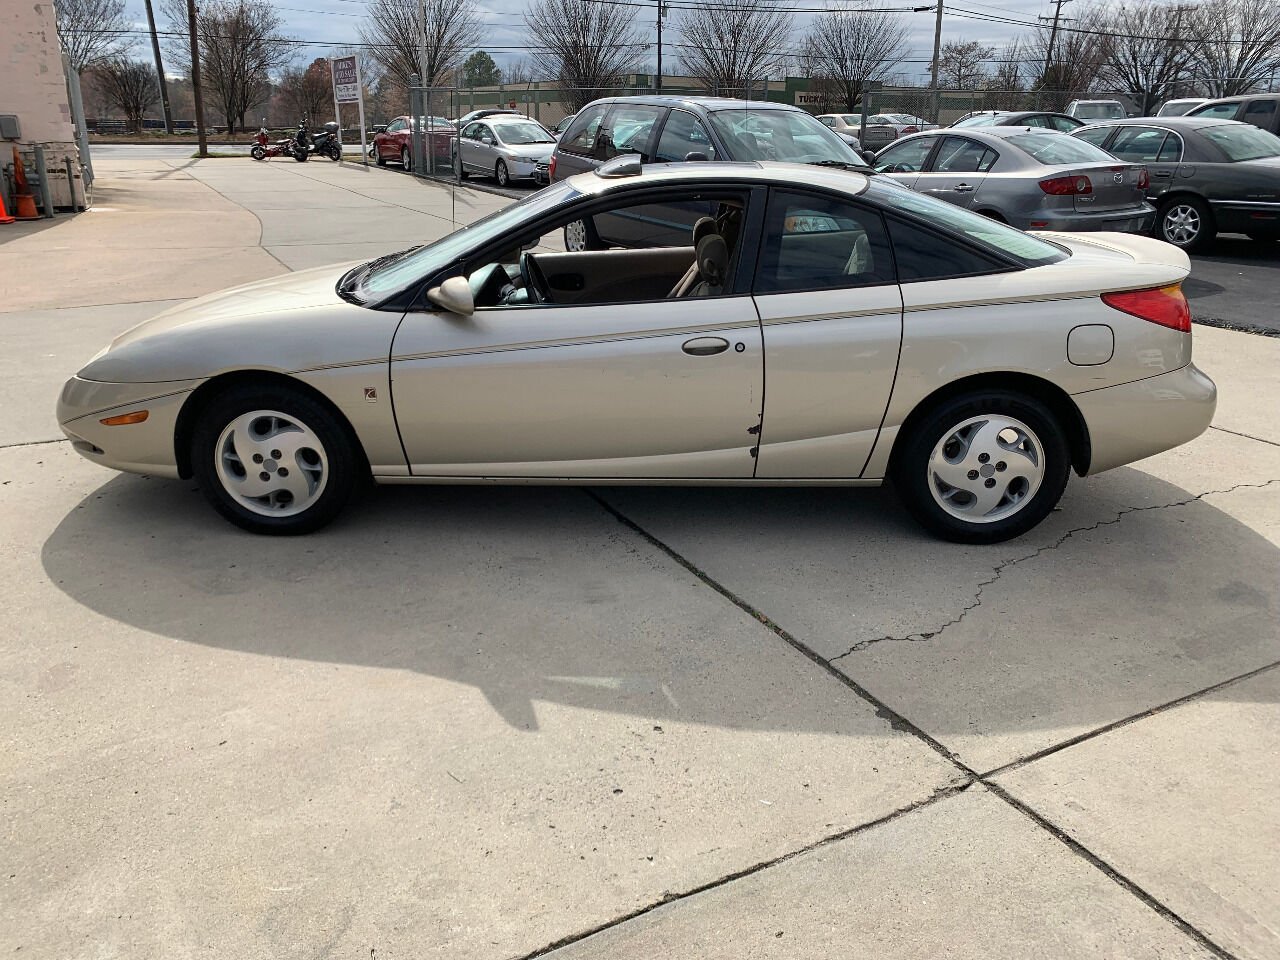 Saturn S-Series For Sale - Carsforsale.com®